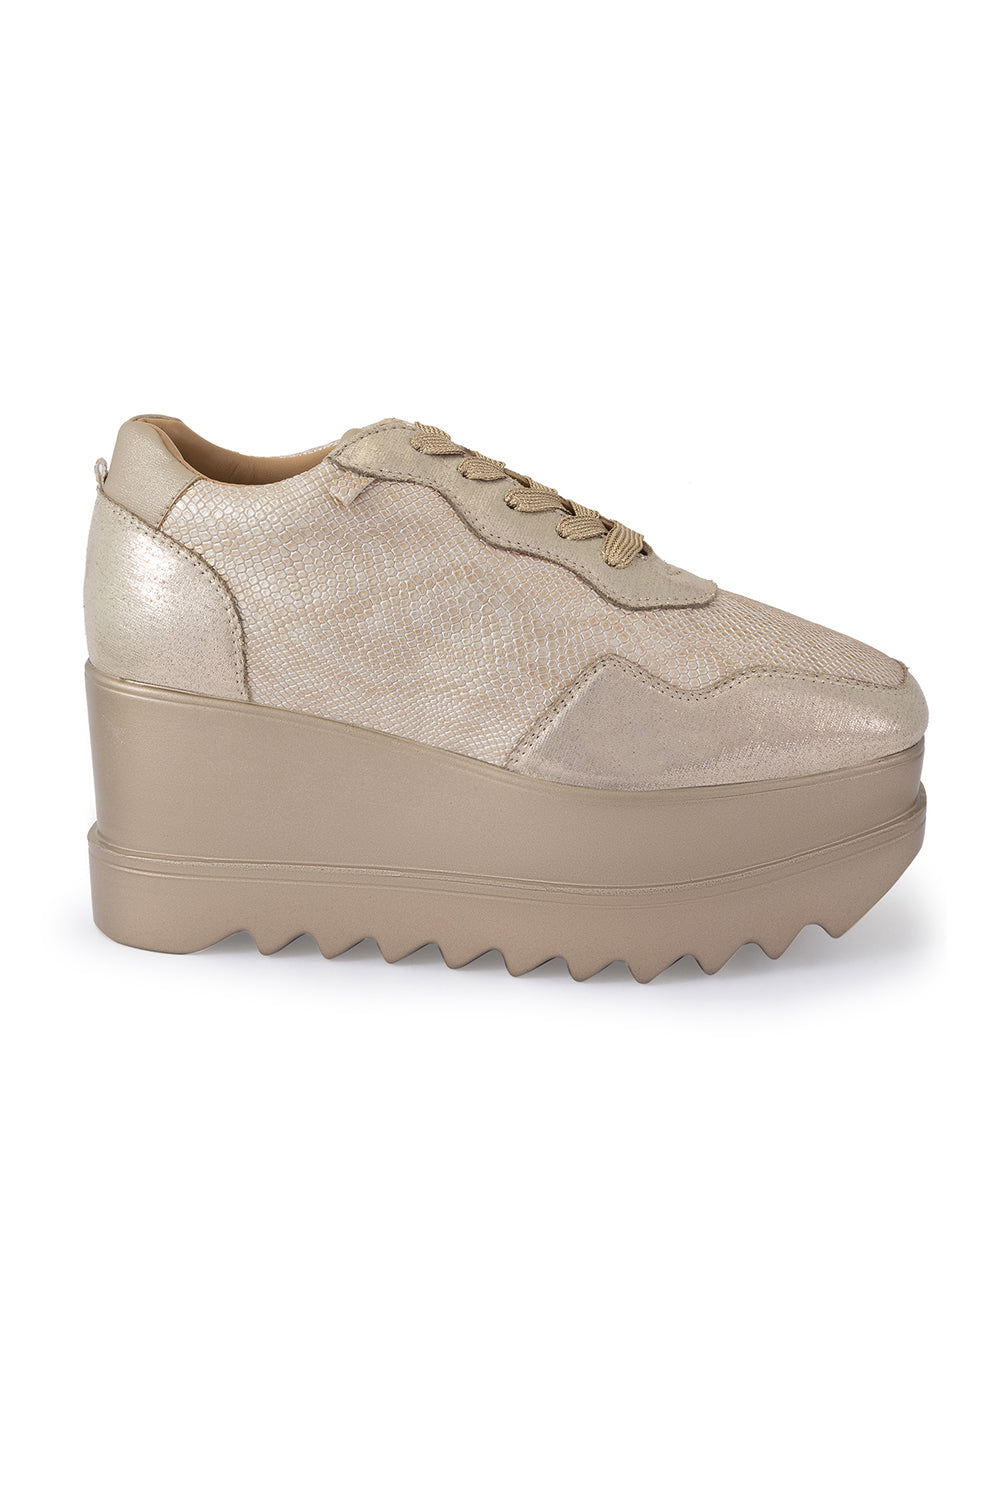 Champagne Gold Groove Signature Wedge Sneakers